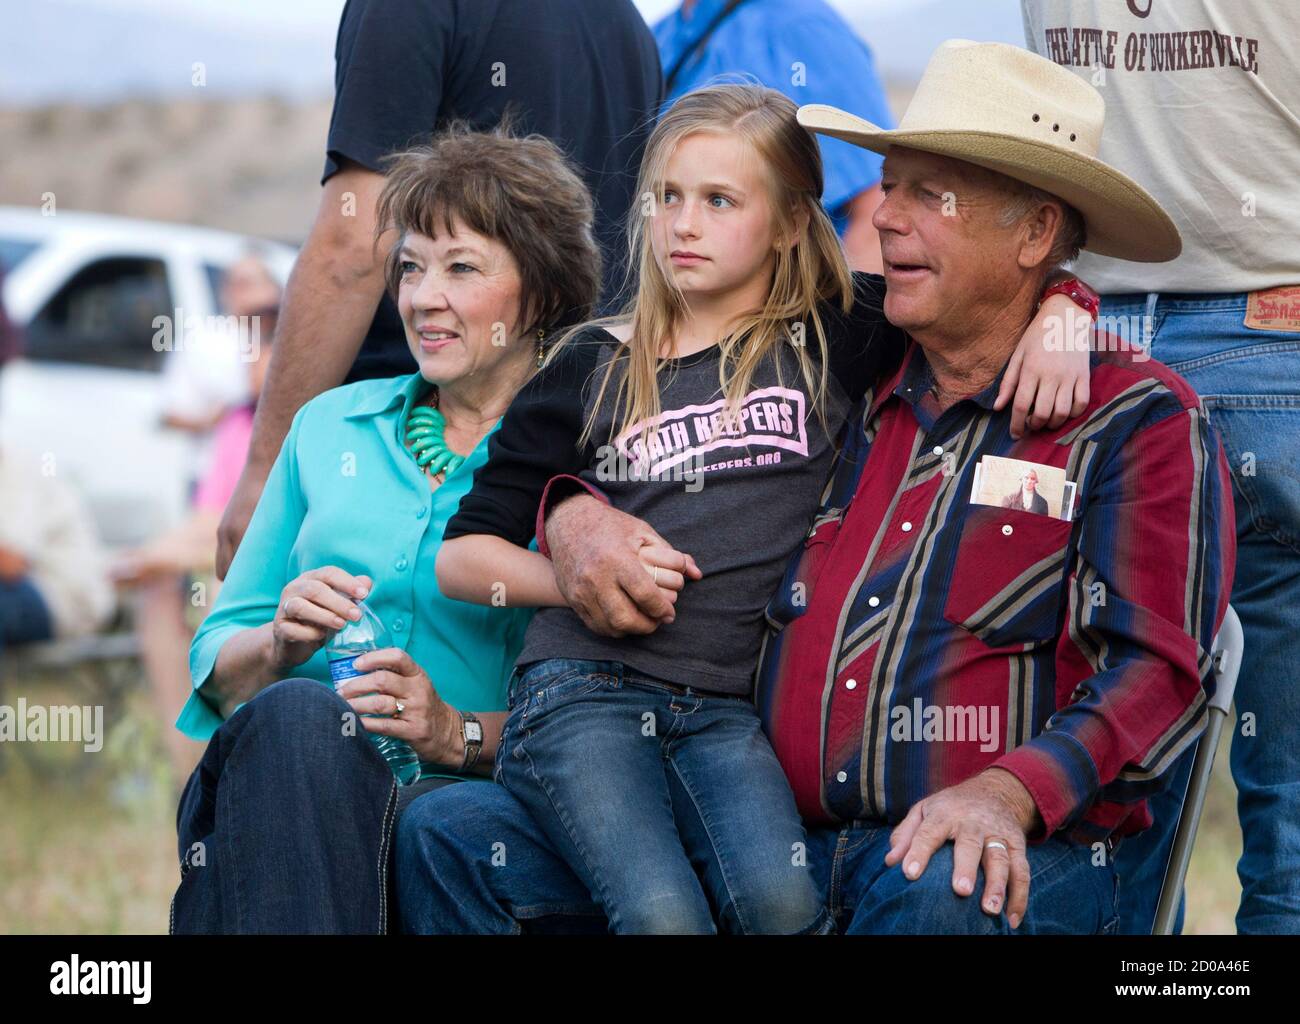 Rancher Cliven Bundy, his wife Carol (L) and his granddaughter Jerusha Bundy  (C), 10, listen to live music during a Bundy family "Patriot Party" near  Bunkerville, Nevada, about 80 miles from Las